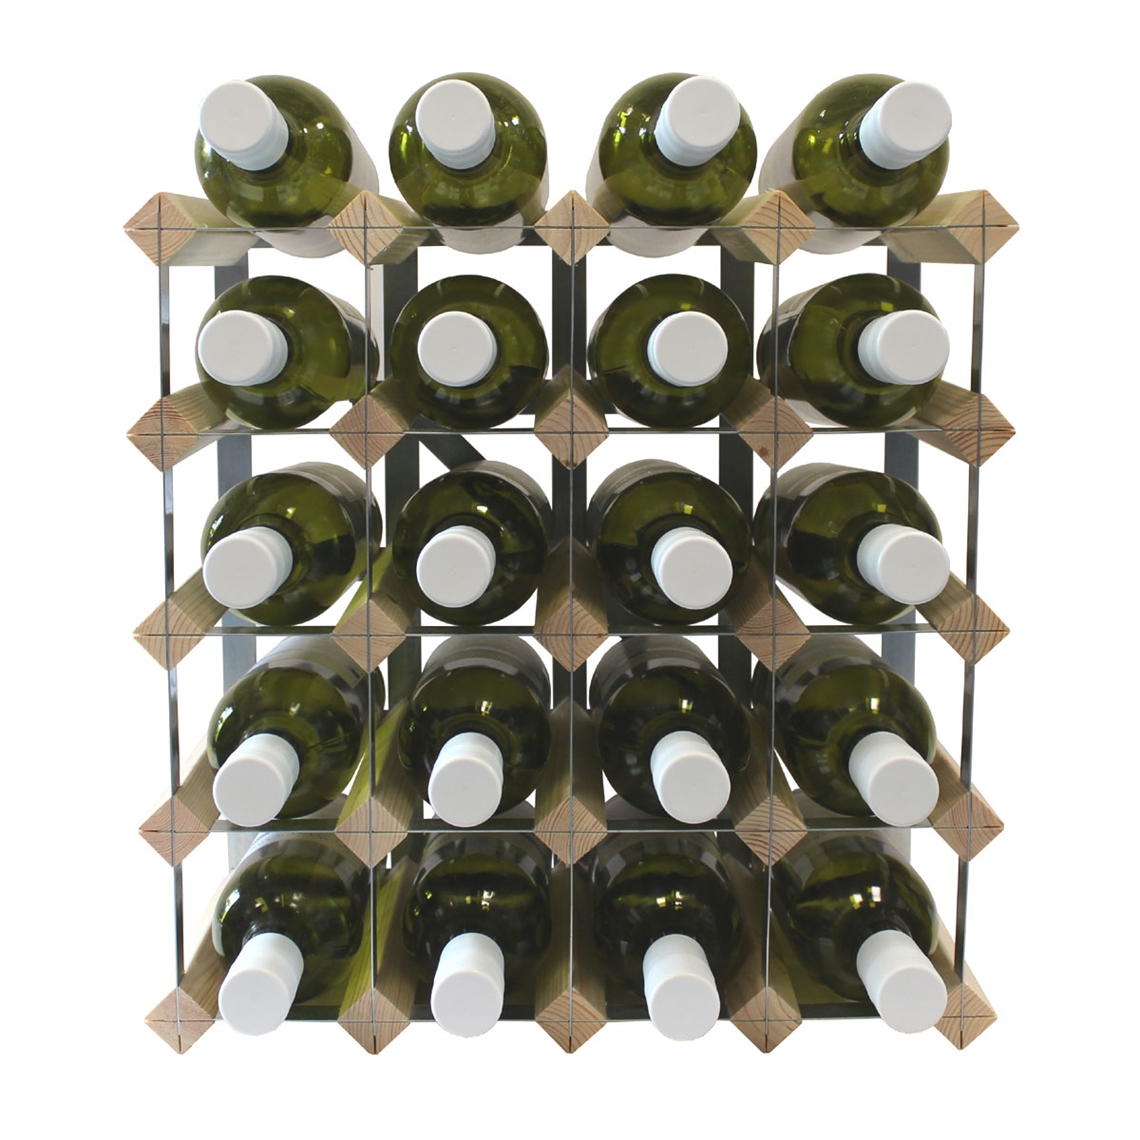 View more vintageview from our Assembled Wine Racks range